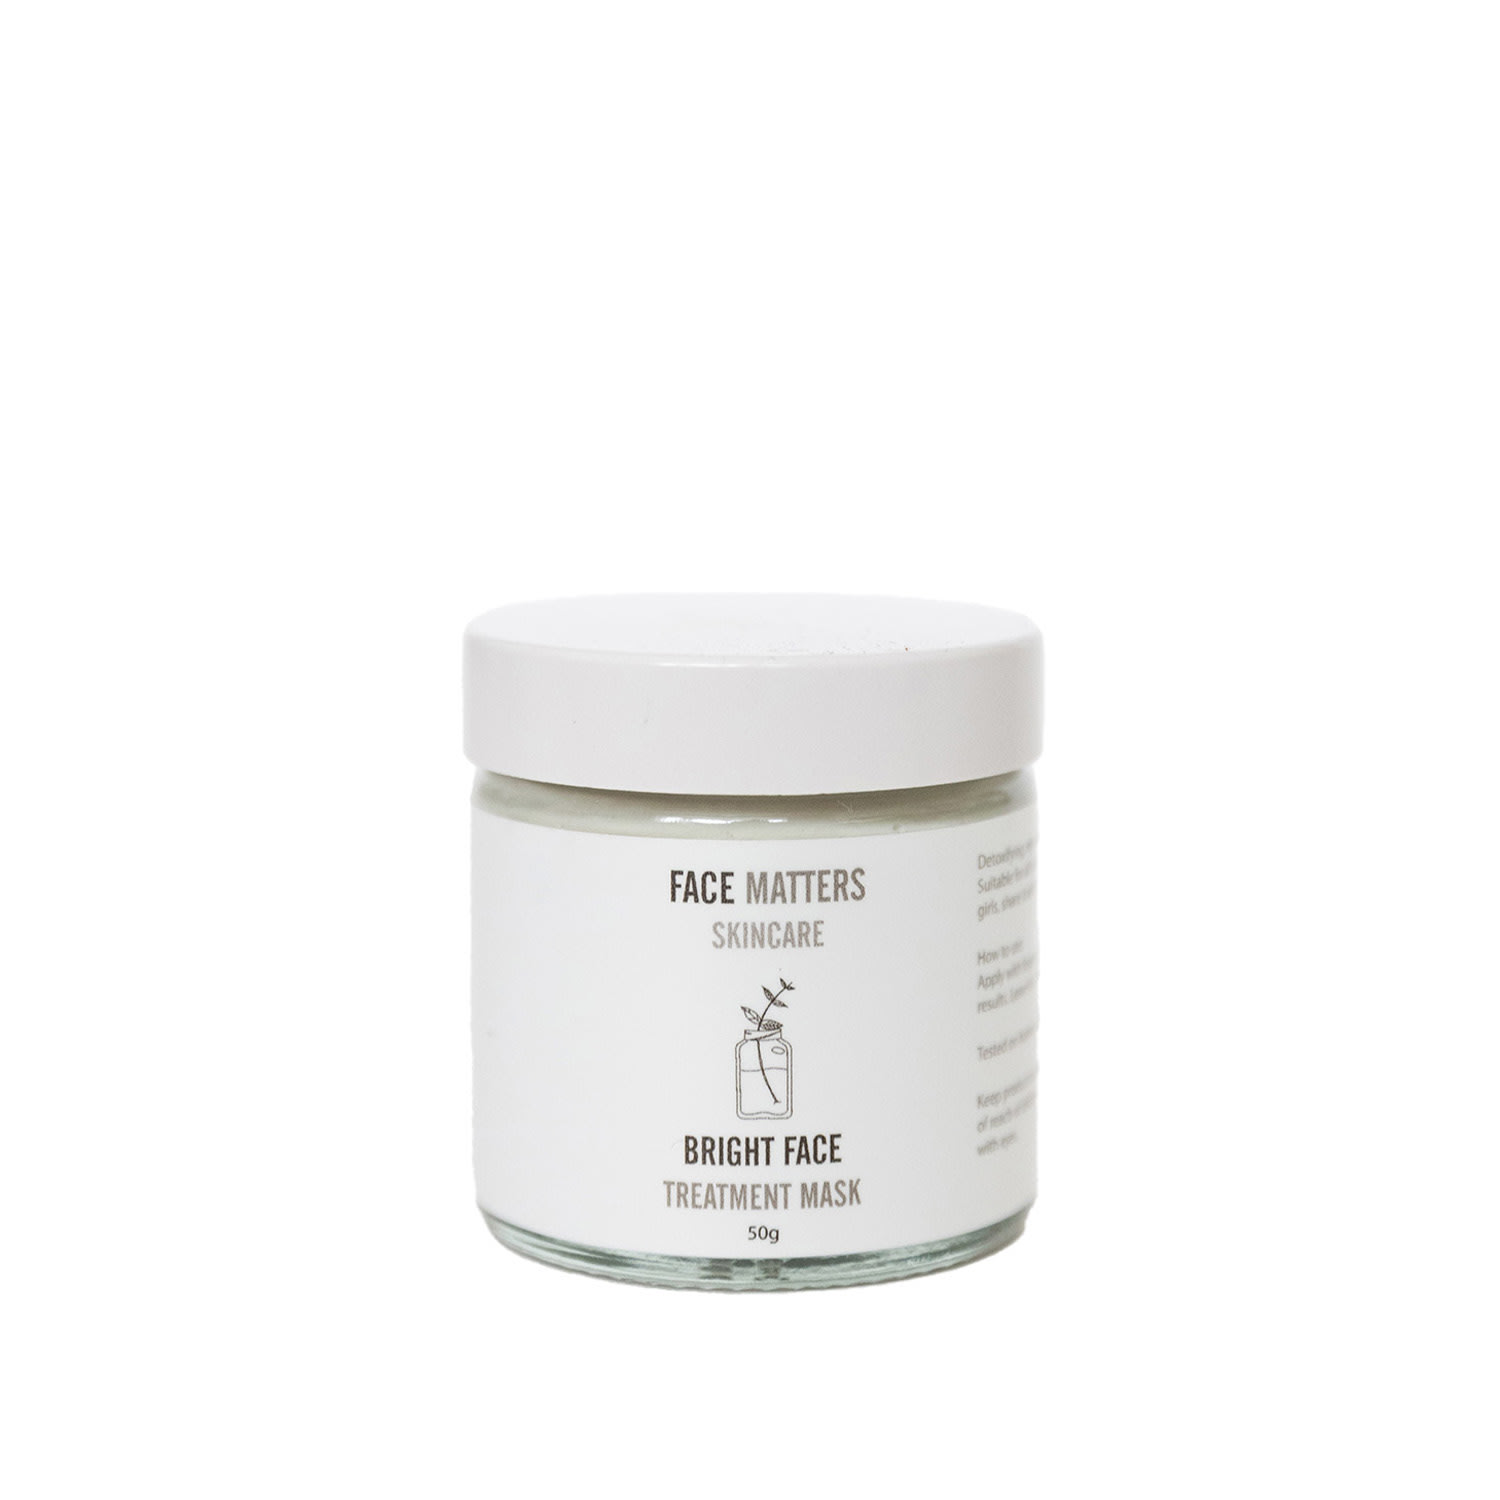 Neutrals Bright Face Detoxifying Clay Face Mask One Size Face Matters Skincare